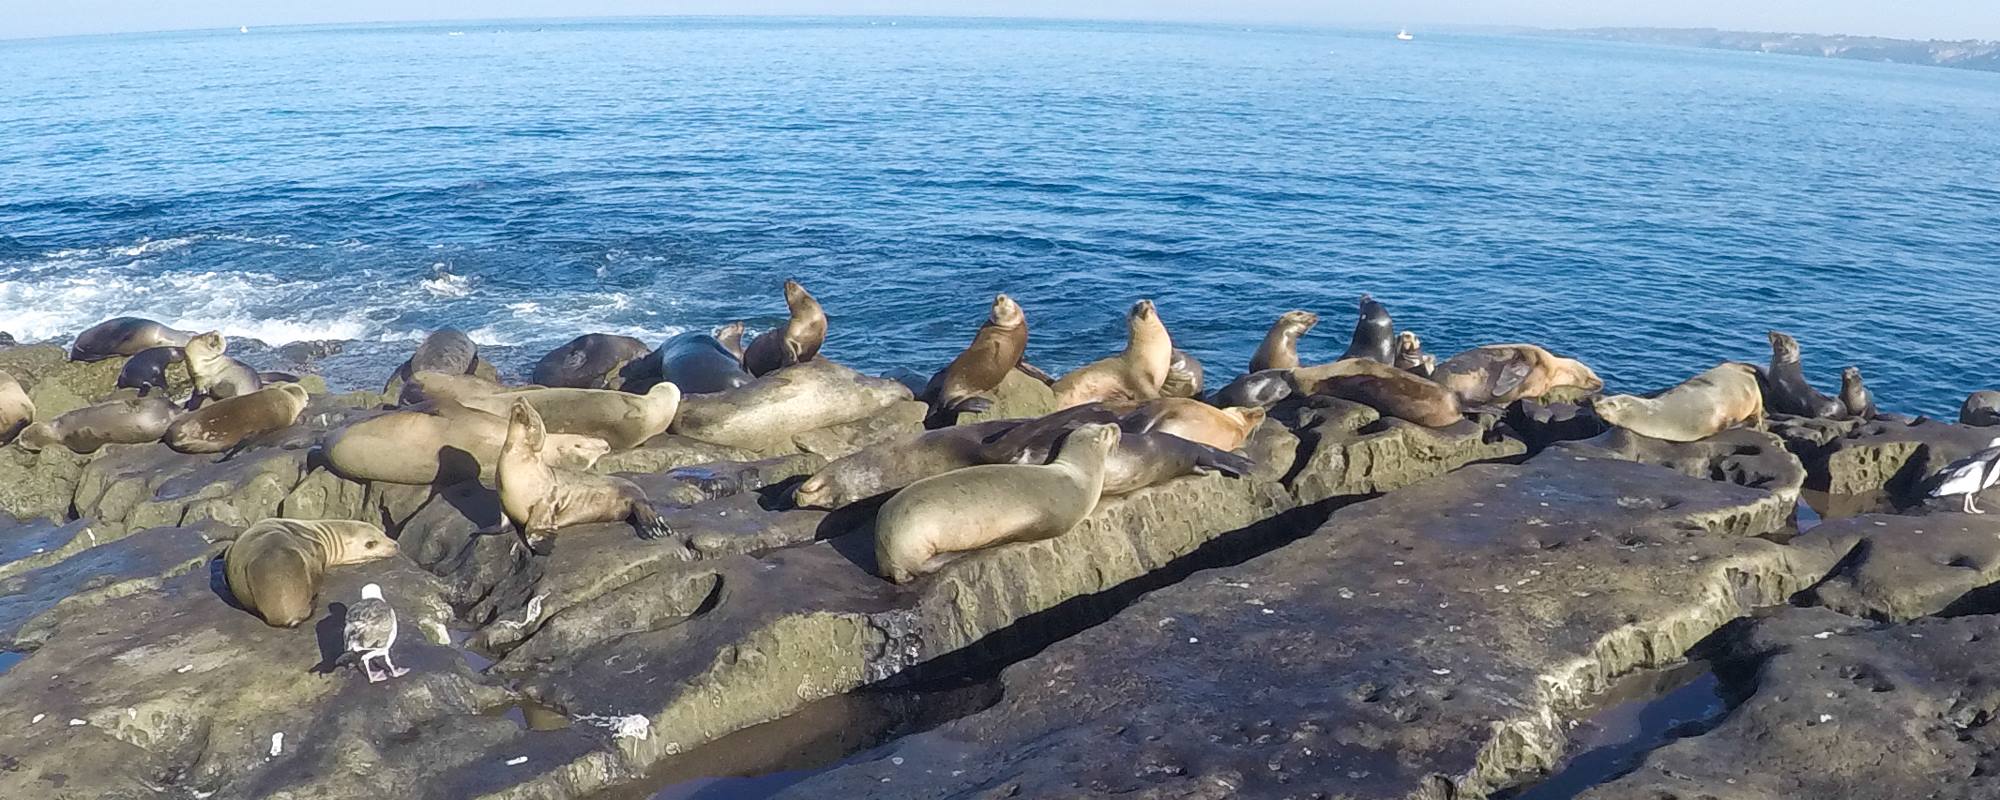 Sea lions in San Diego.